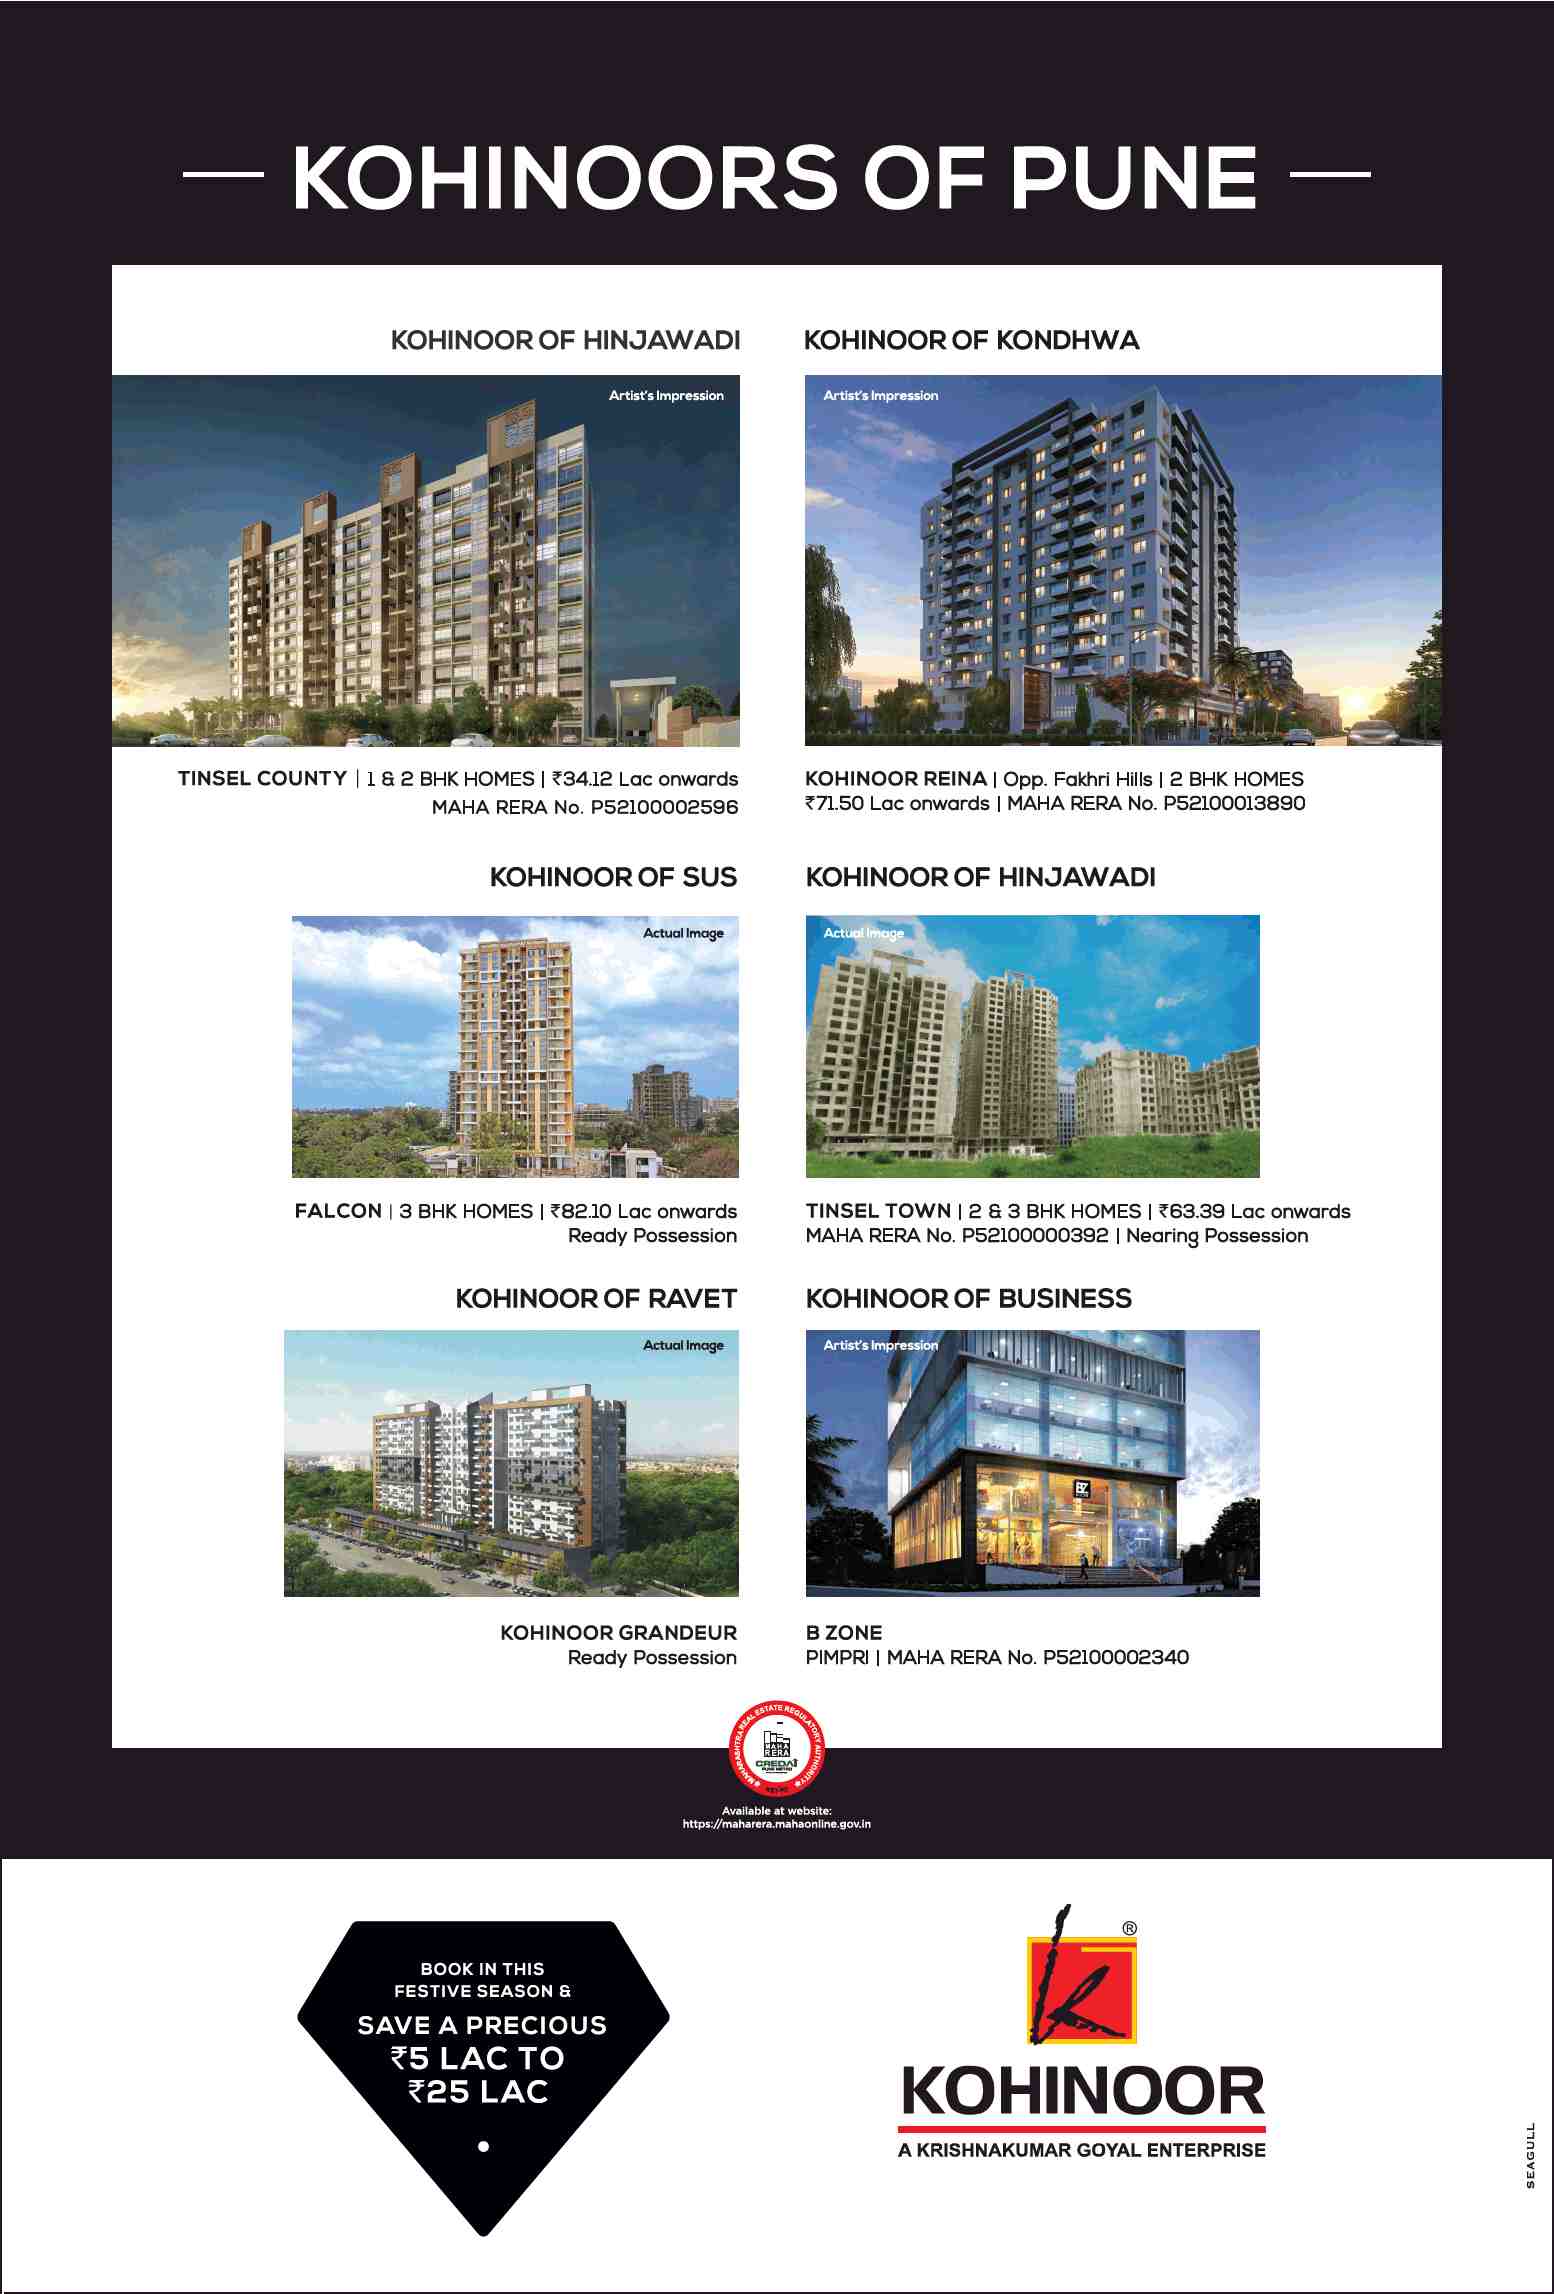 Book a property in Pune by Kohinoor Group in festive season & save up to Rs. 5 to 25 Lacs